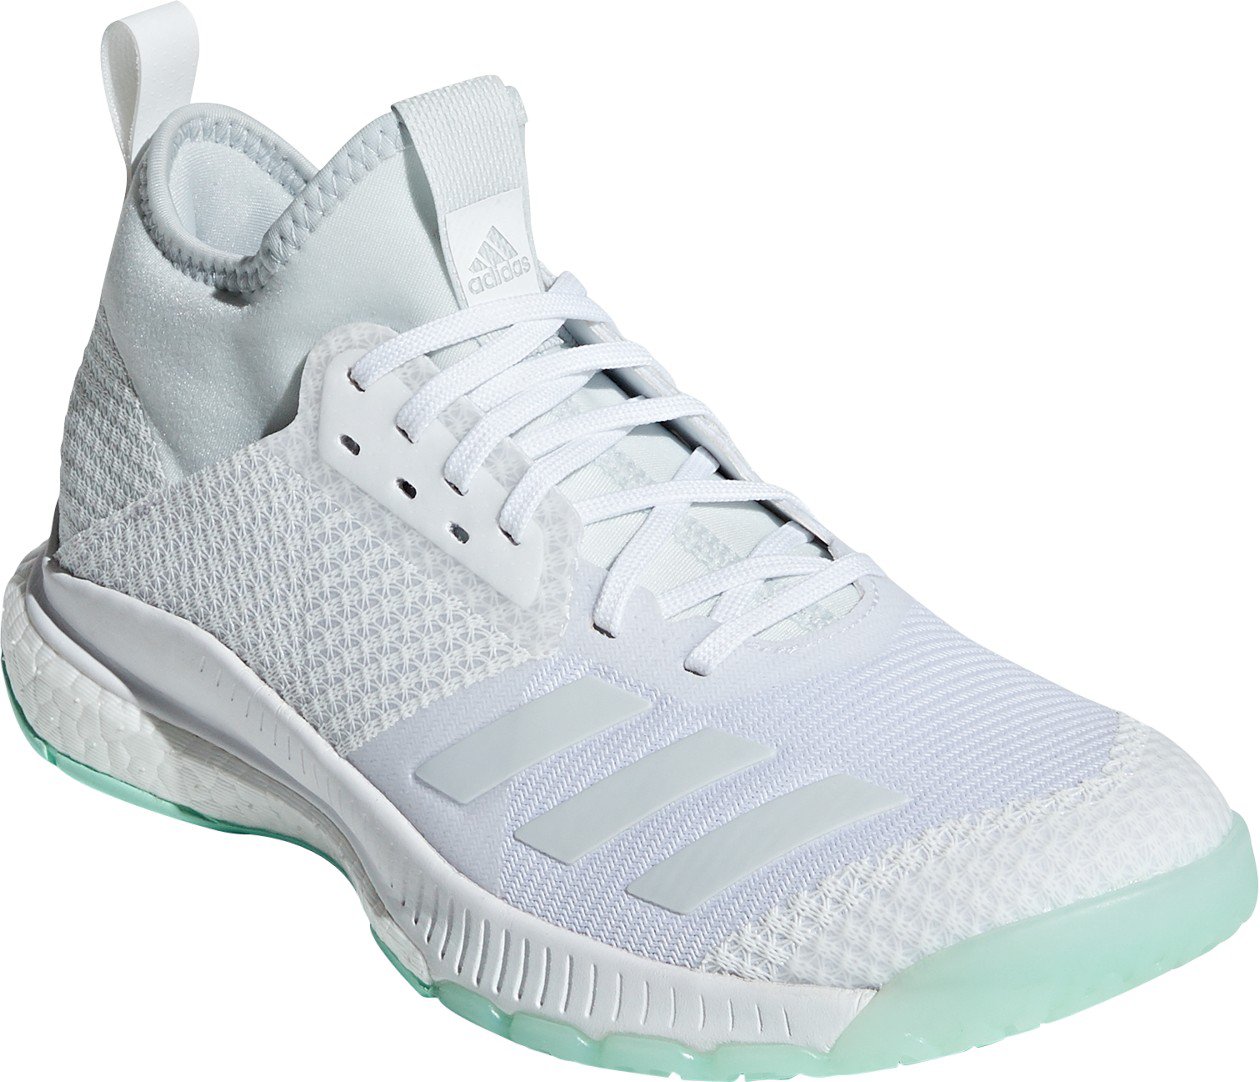 white high top adidas volleyball shoes